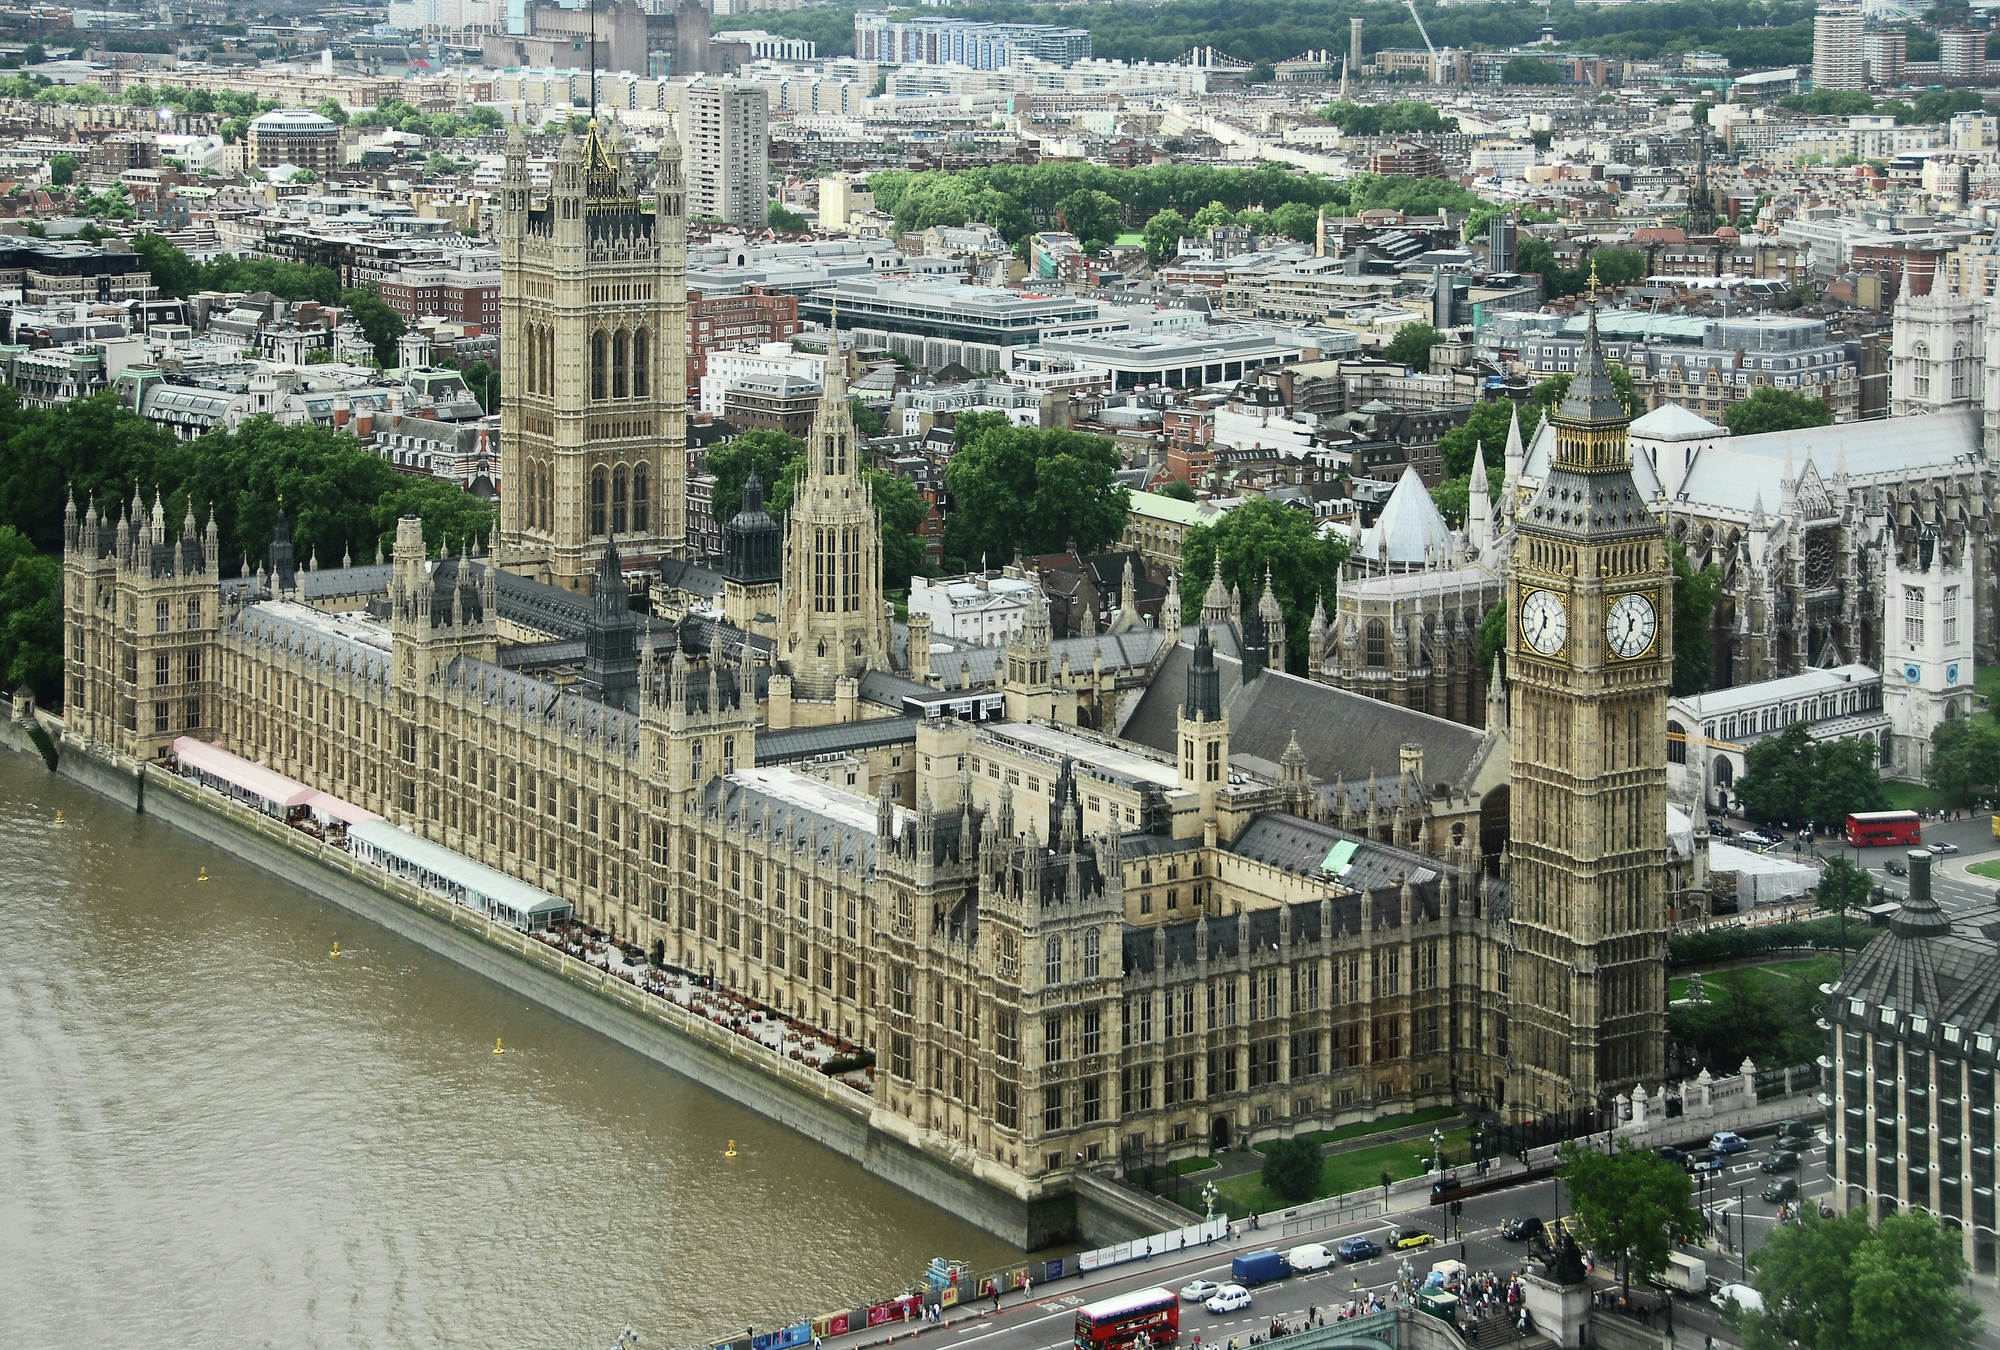 Visit Houses of Parliament in London - Uminhnationalpark